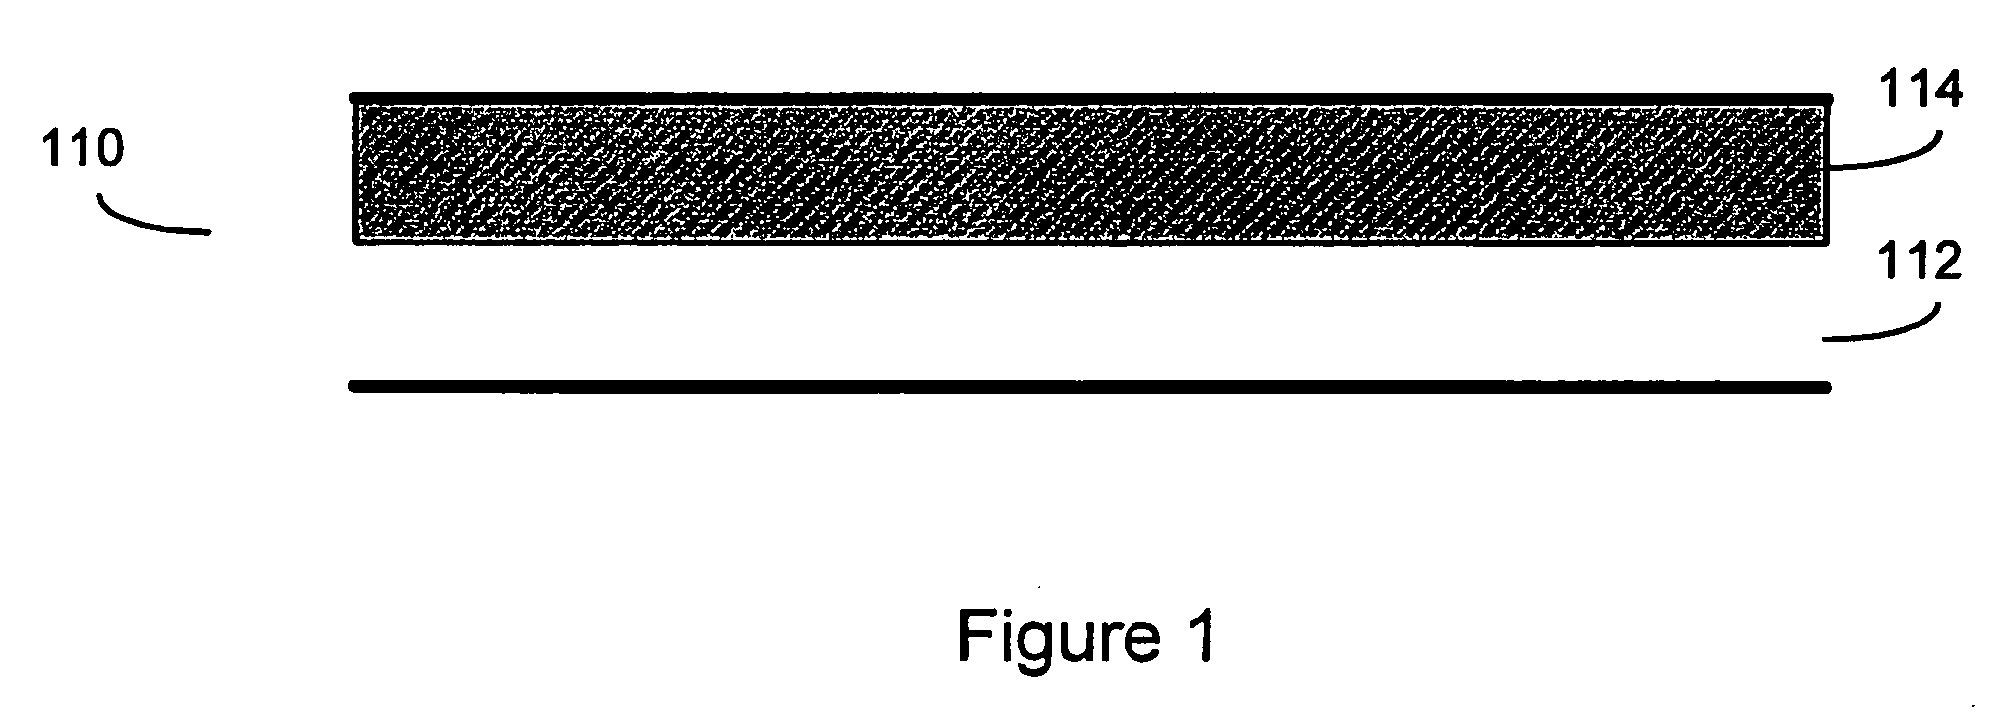 Composition and method for stabilizing road base